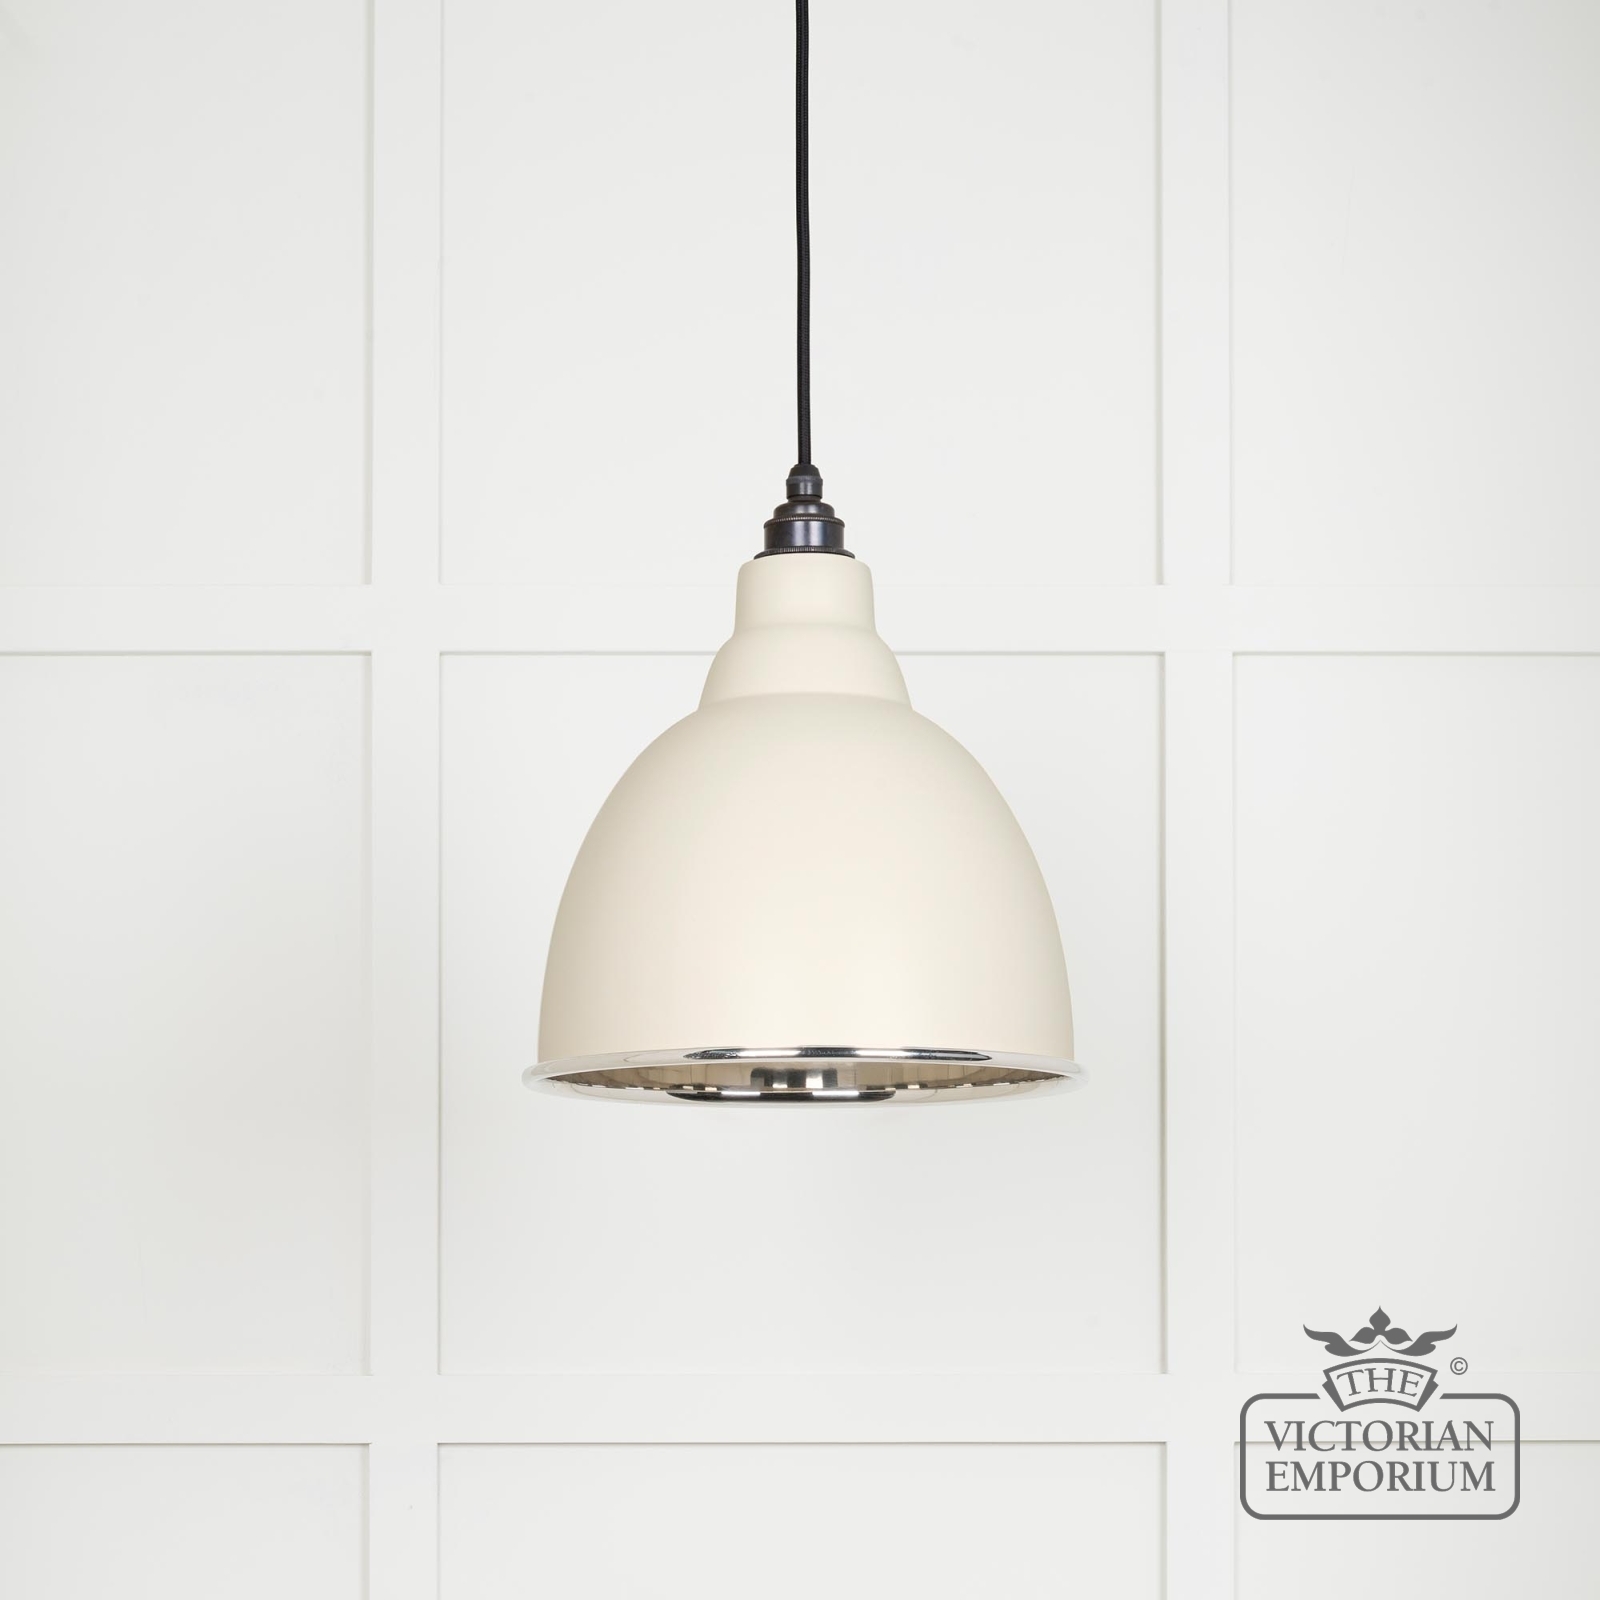 Brindle pendant light in Teasel with nickel interior